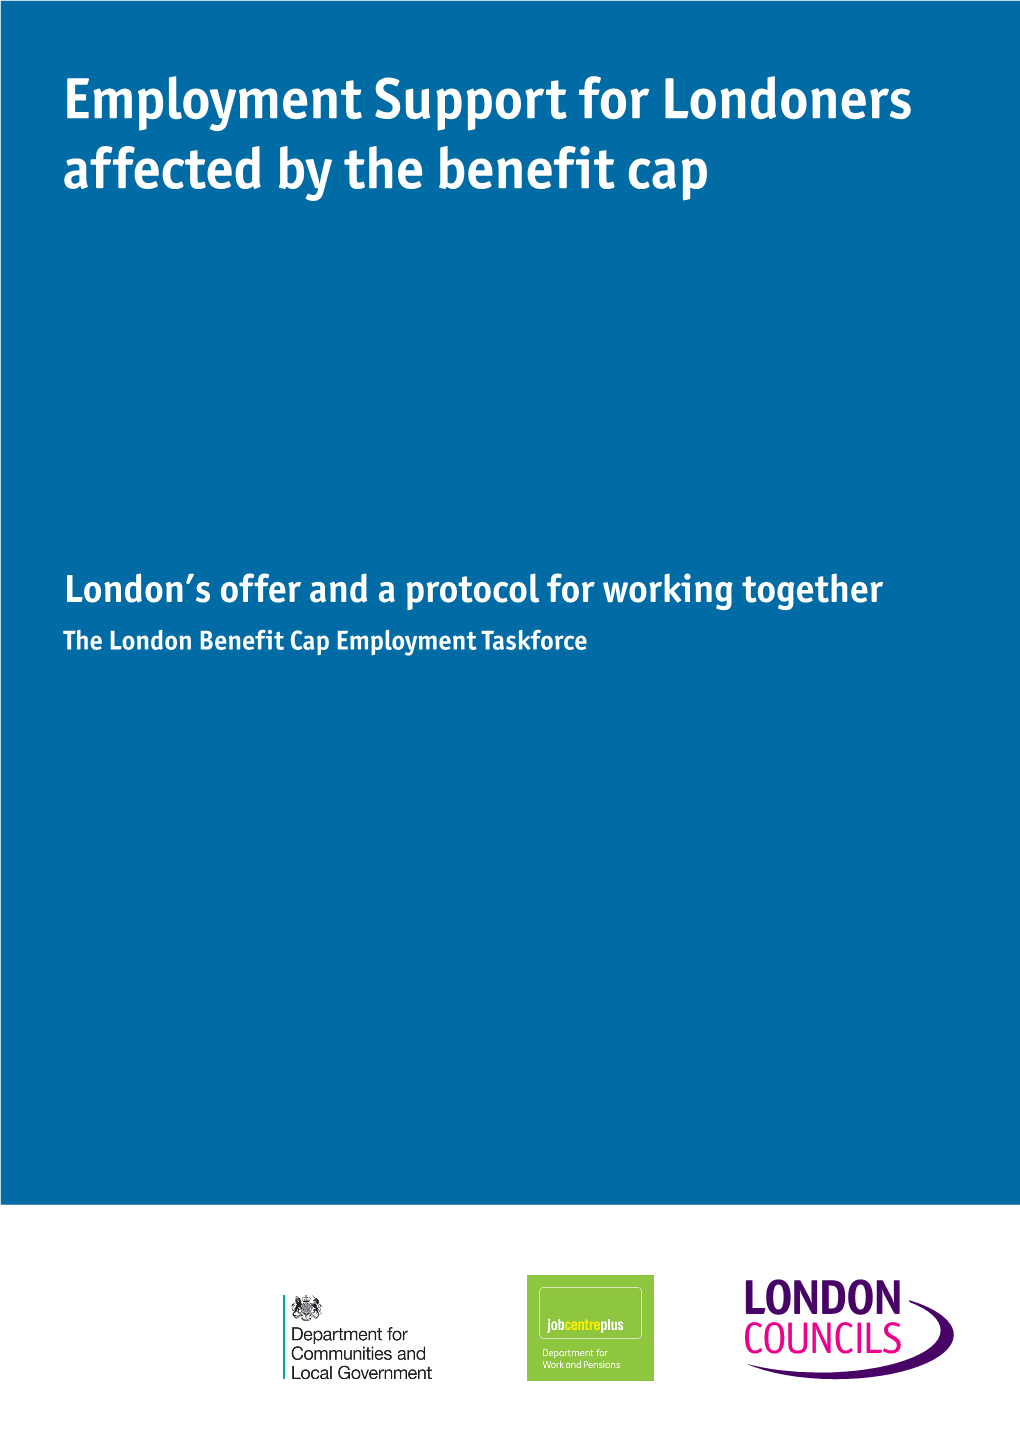 Employment Support for Londoners Affected by the Benefit Cap